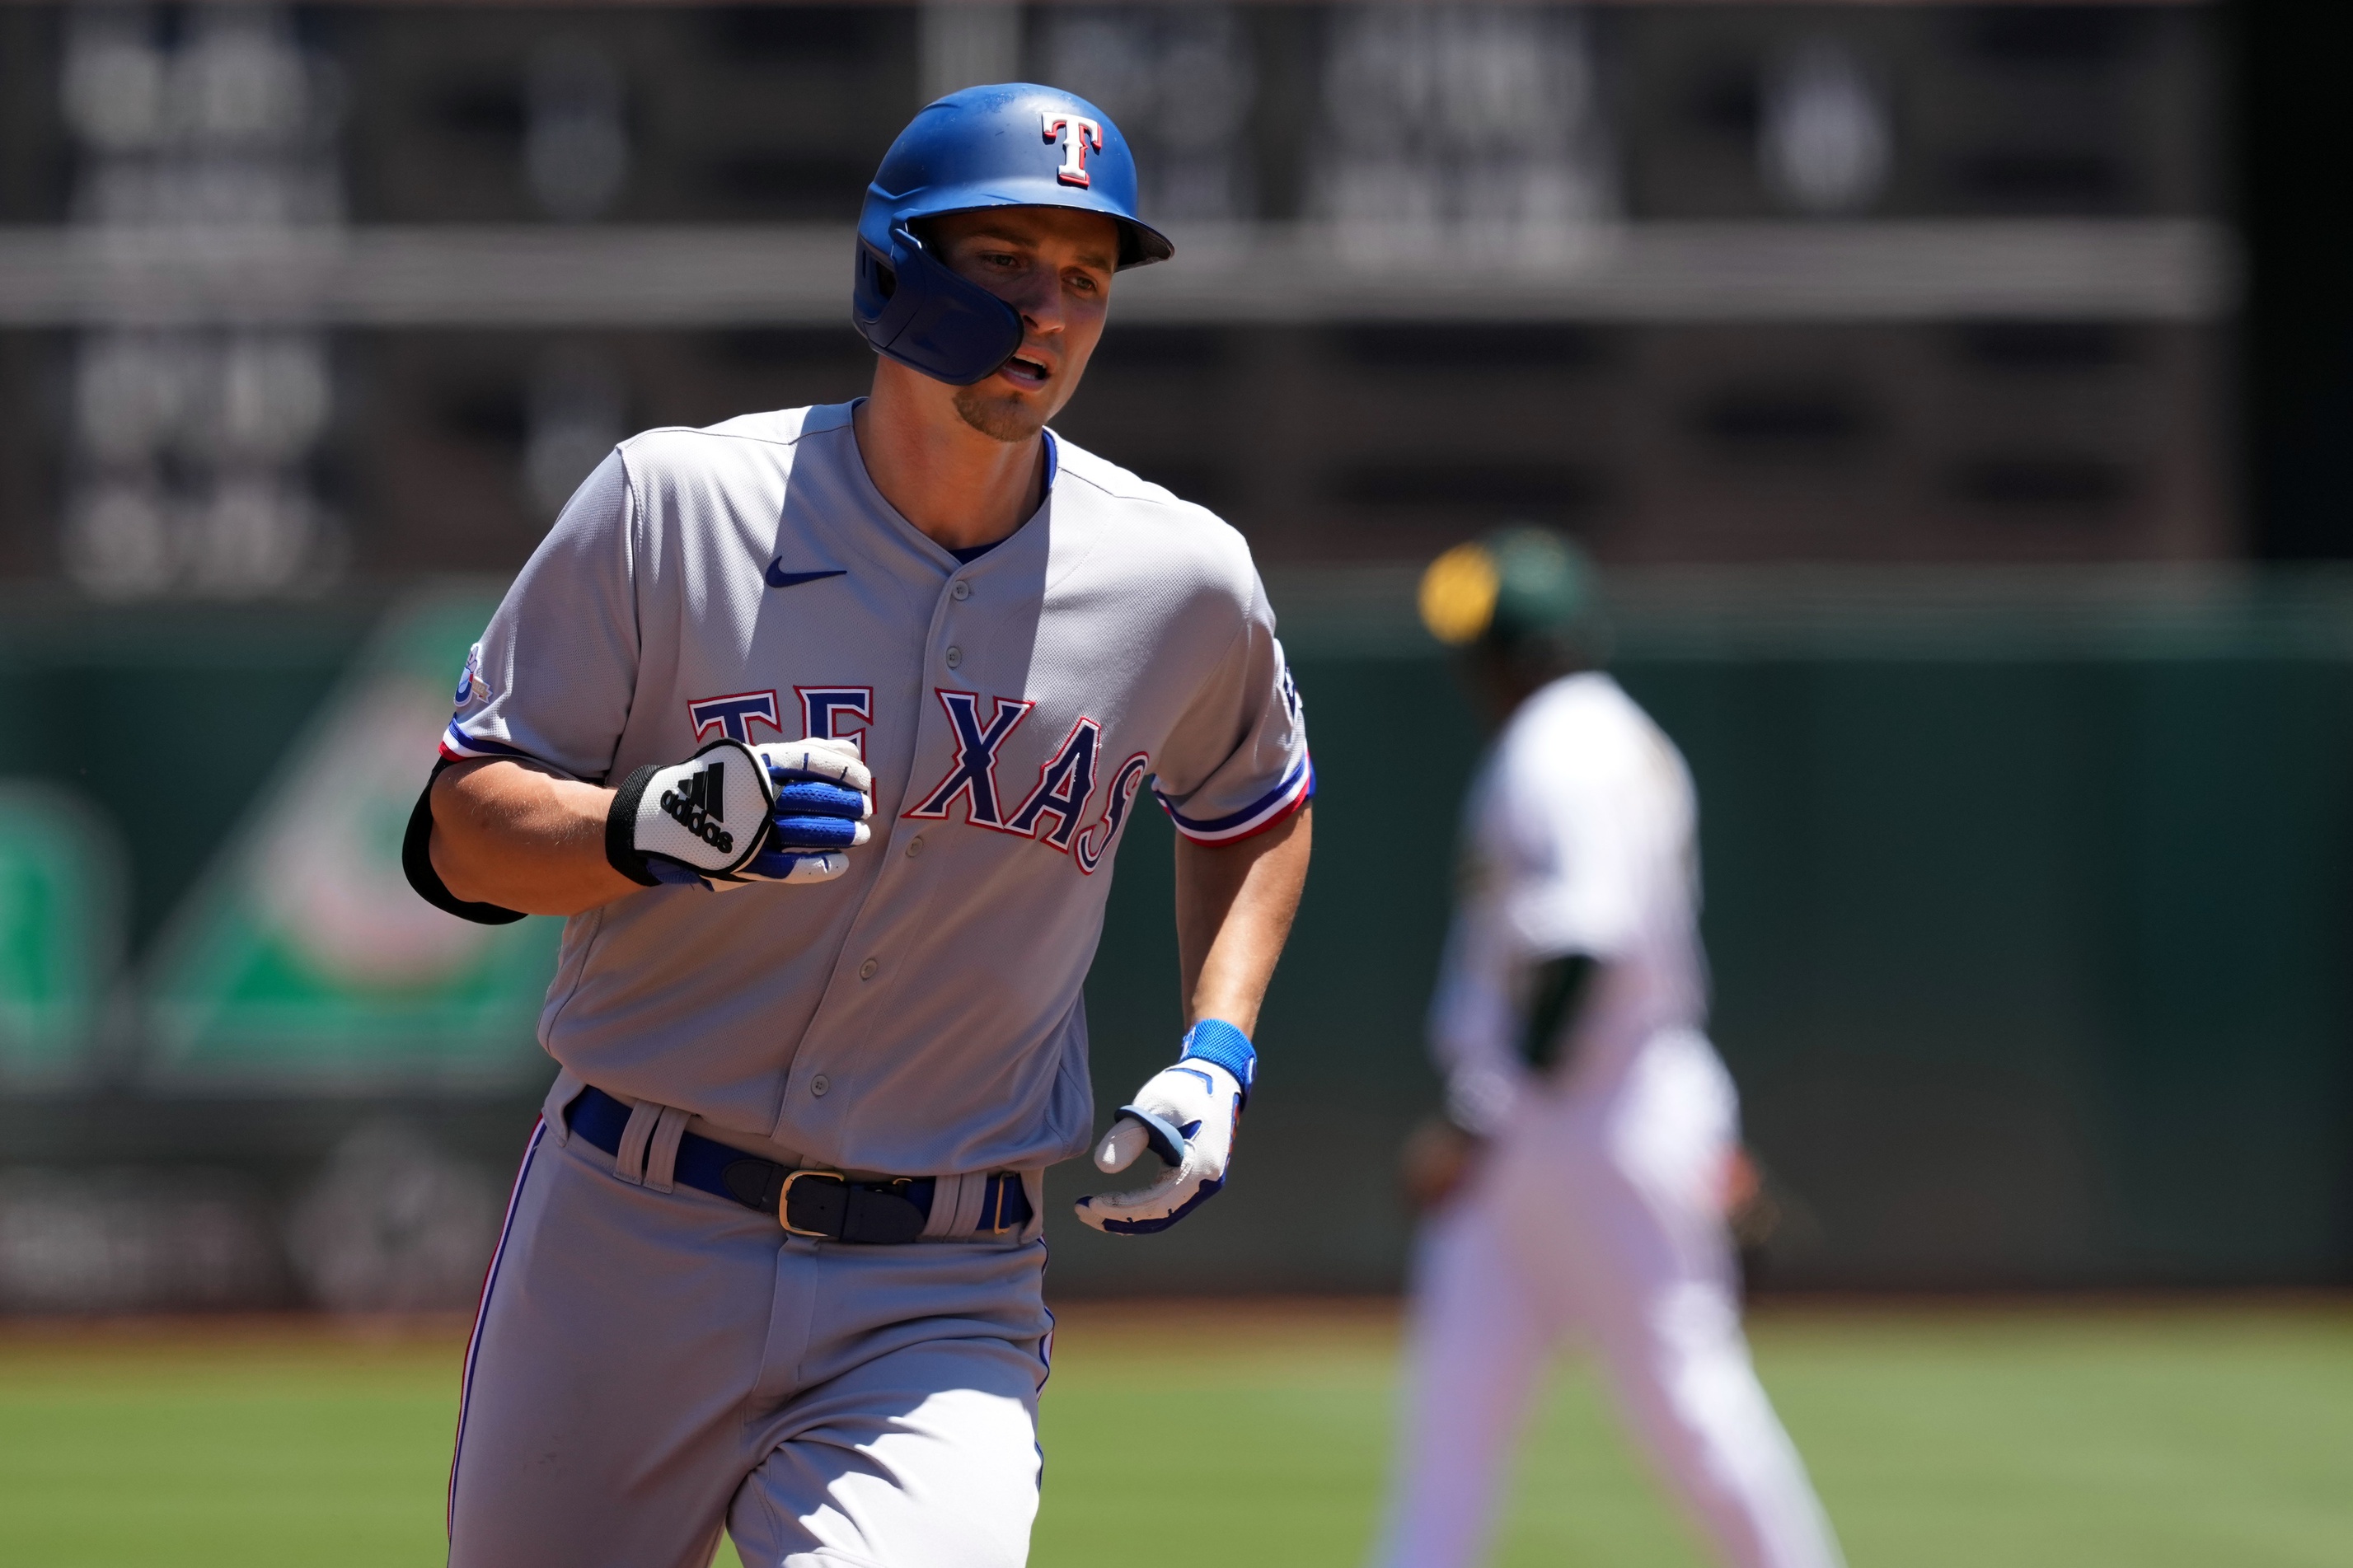 Corey Seager Player Props: Rangers vs. Astros